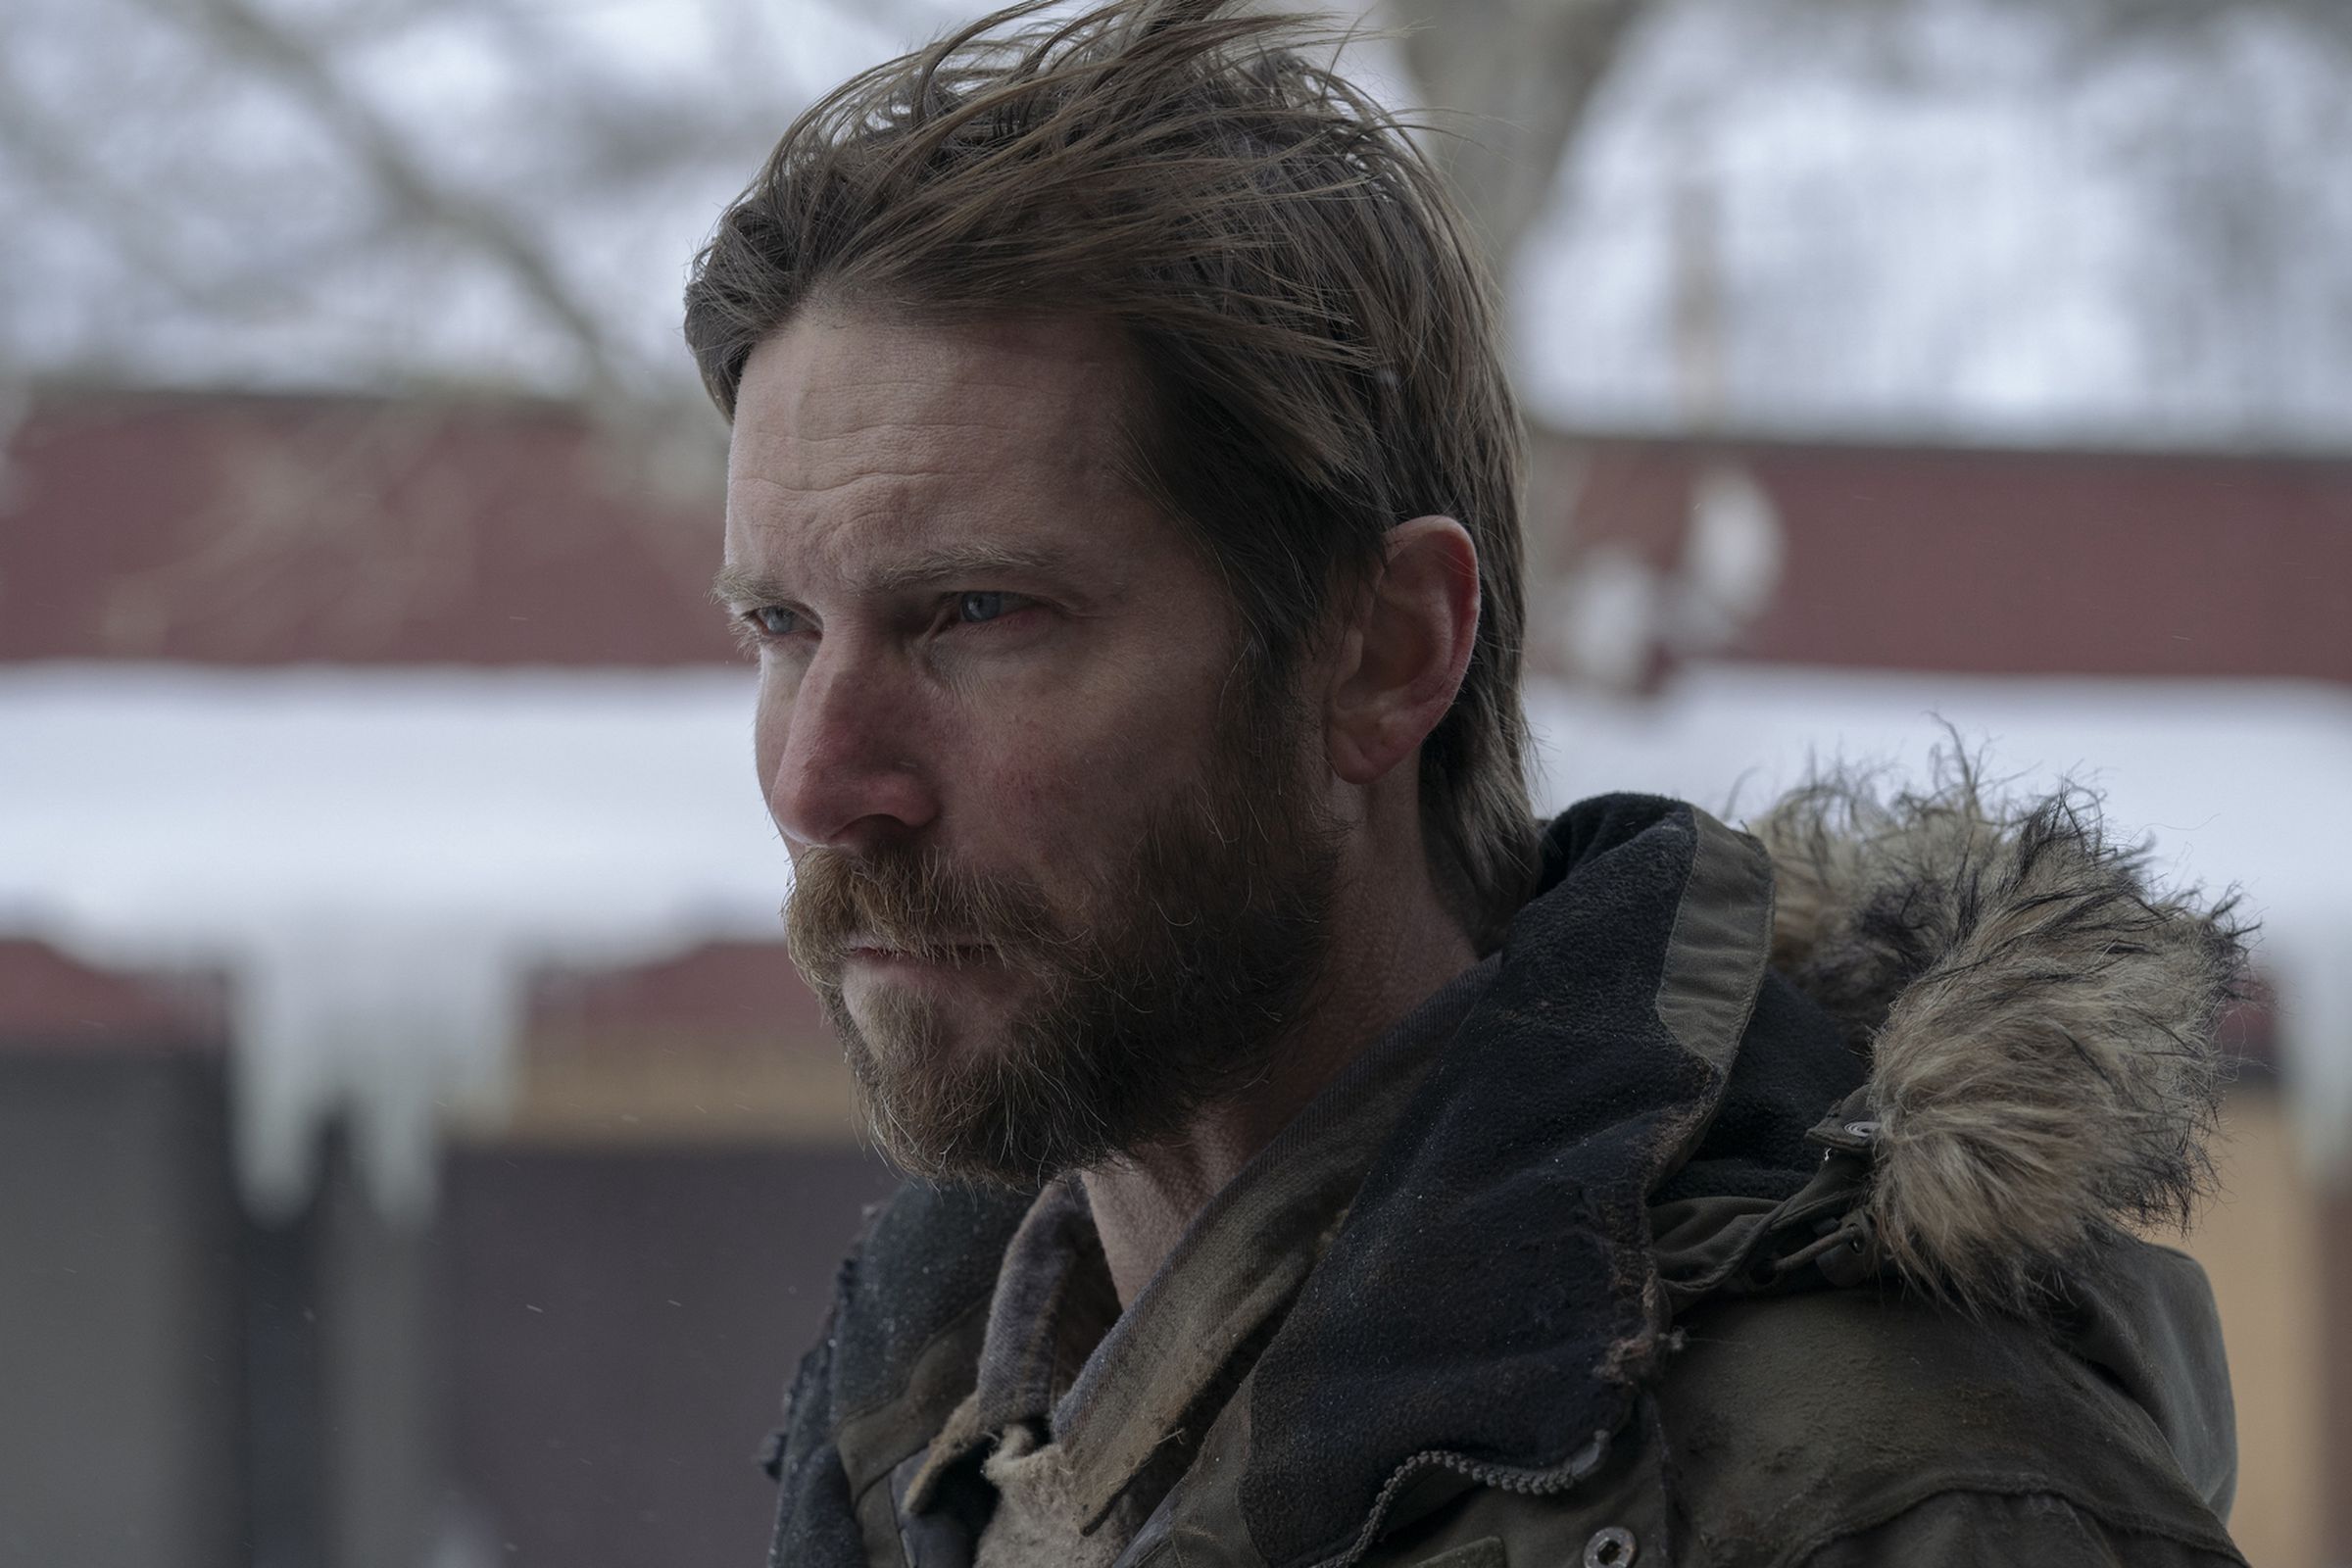 A bearded man with brown hair wearing a winter coat, and standing outside in the cold.